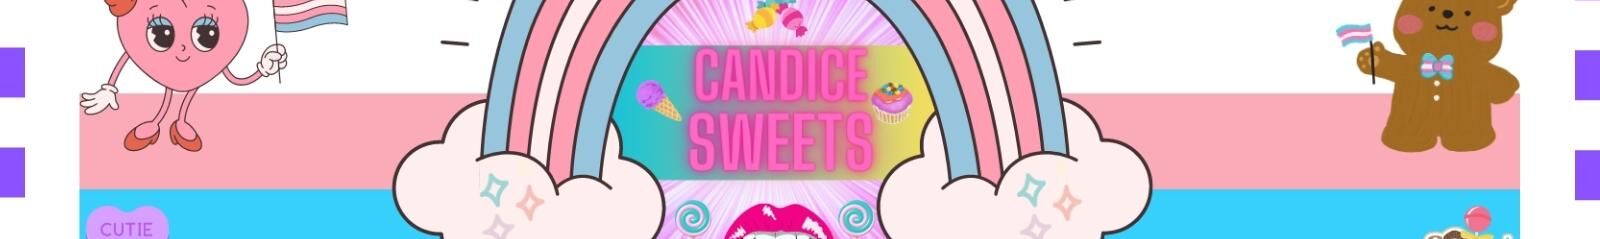 Candice Sweets